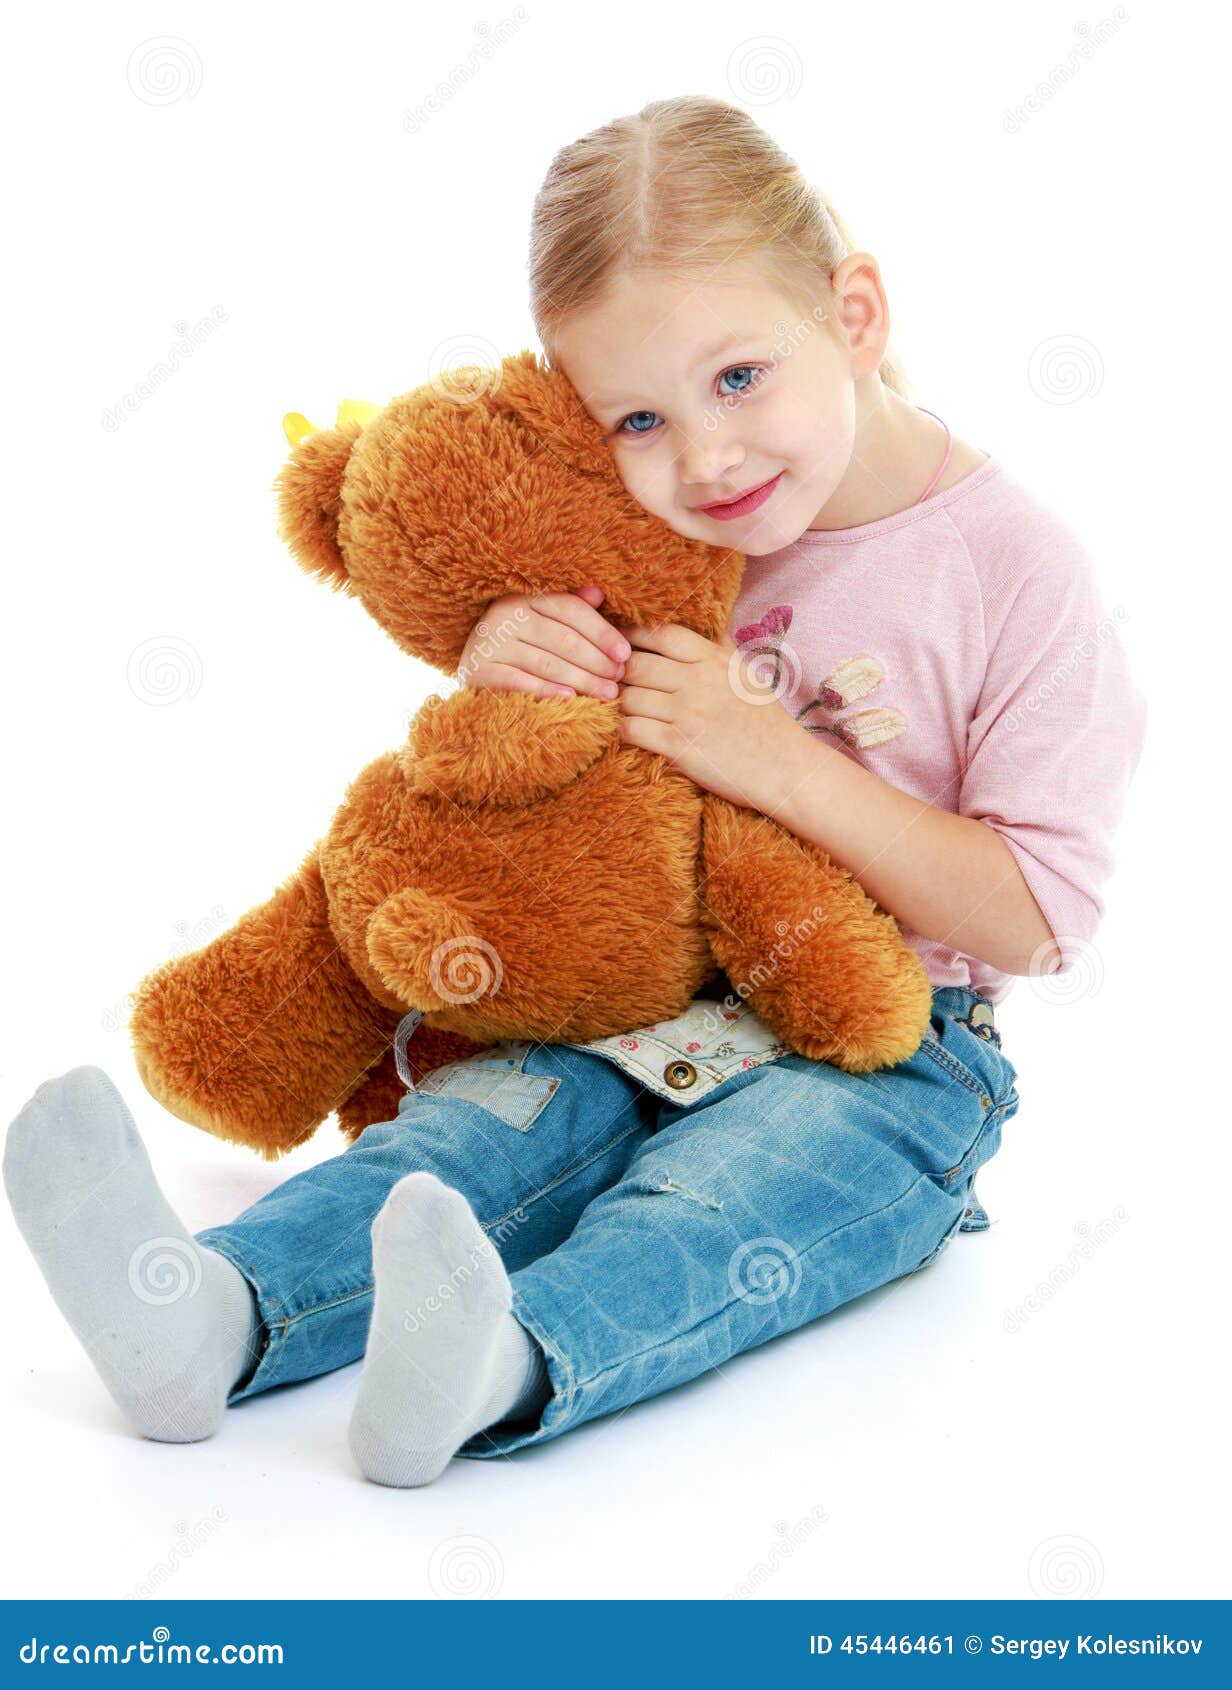 Little Girl Hugging a Teddy Bear. Stock Image - Image of bedding, child ...